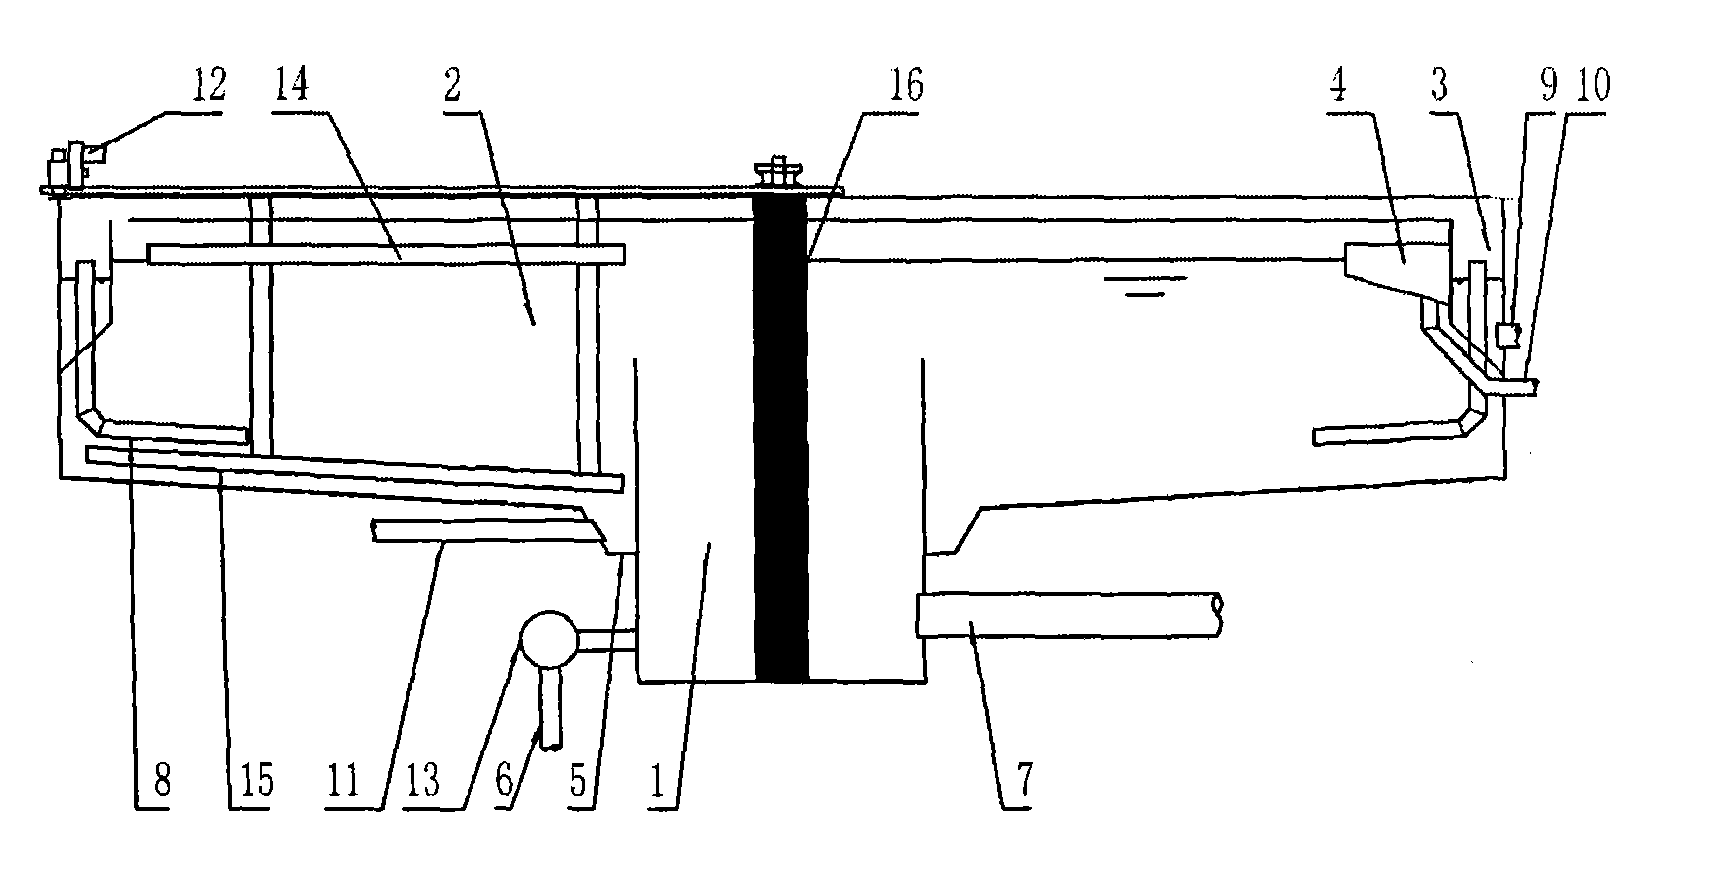 Radial-flow air-flotation thickening apparatus for sludge